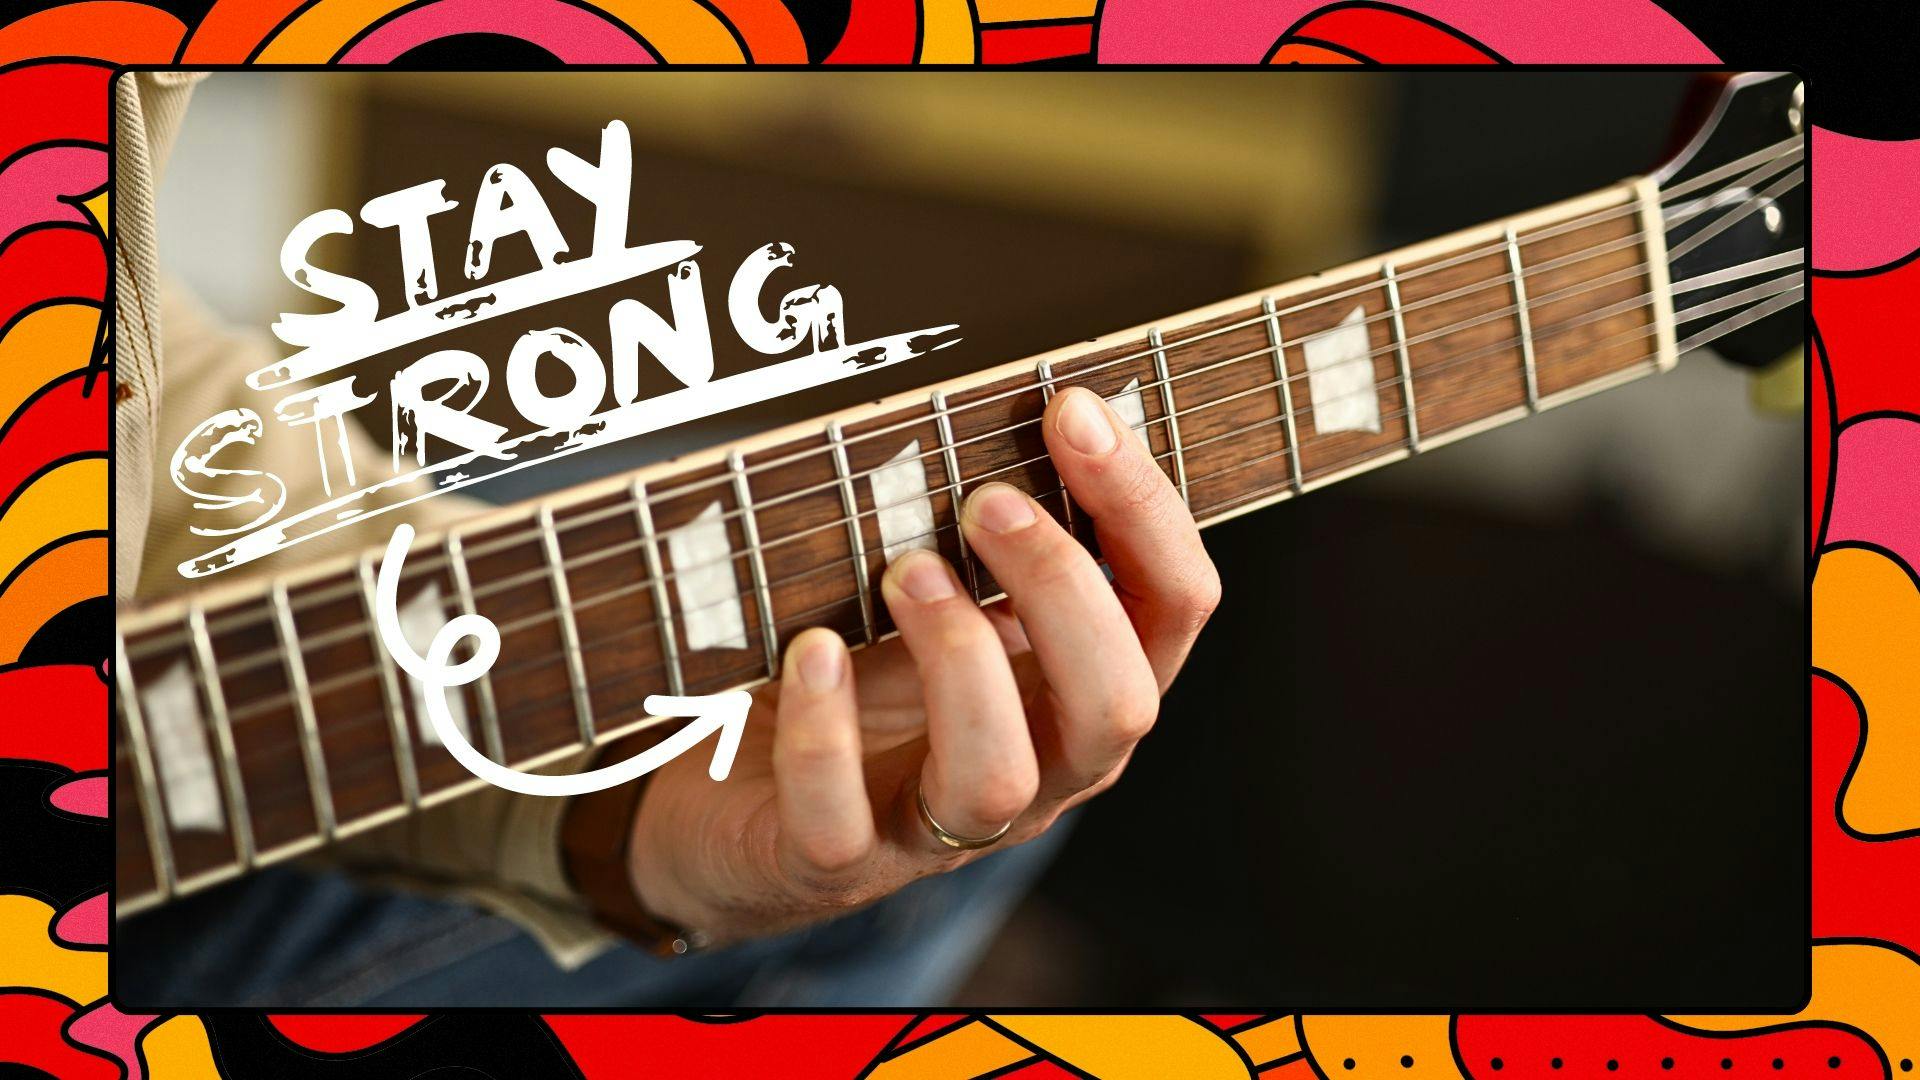 Tips for Developing Finger Dexterity and Strength on the Guitar